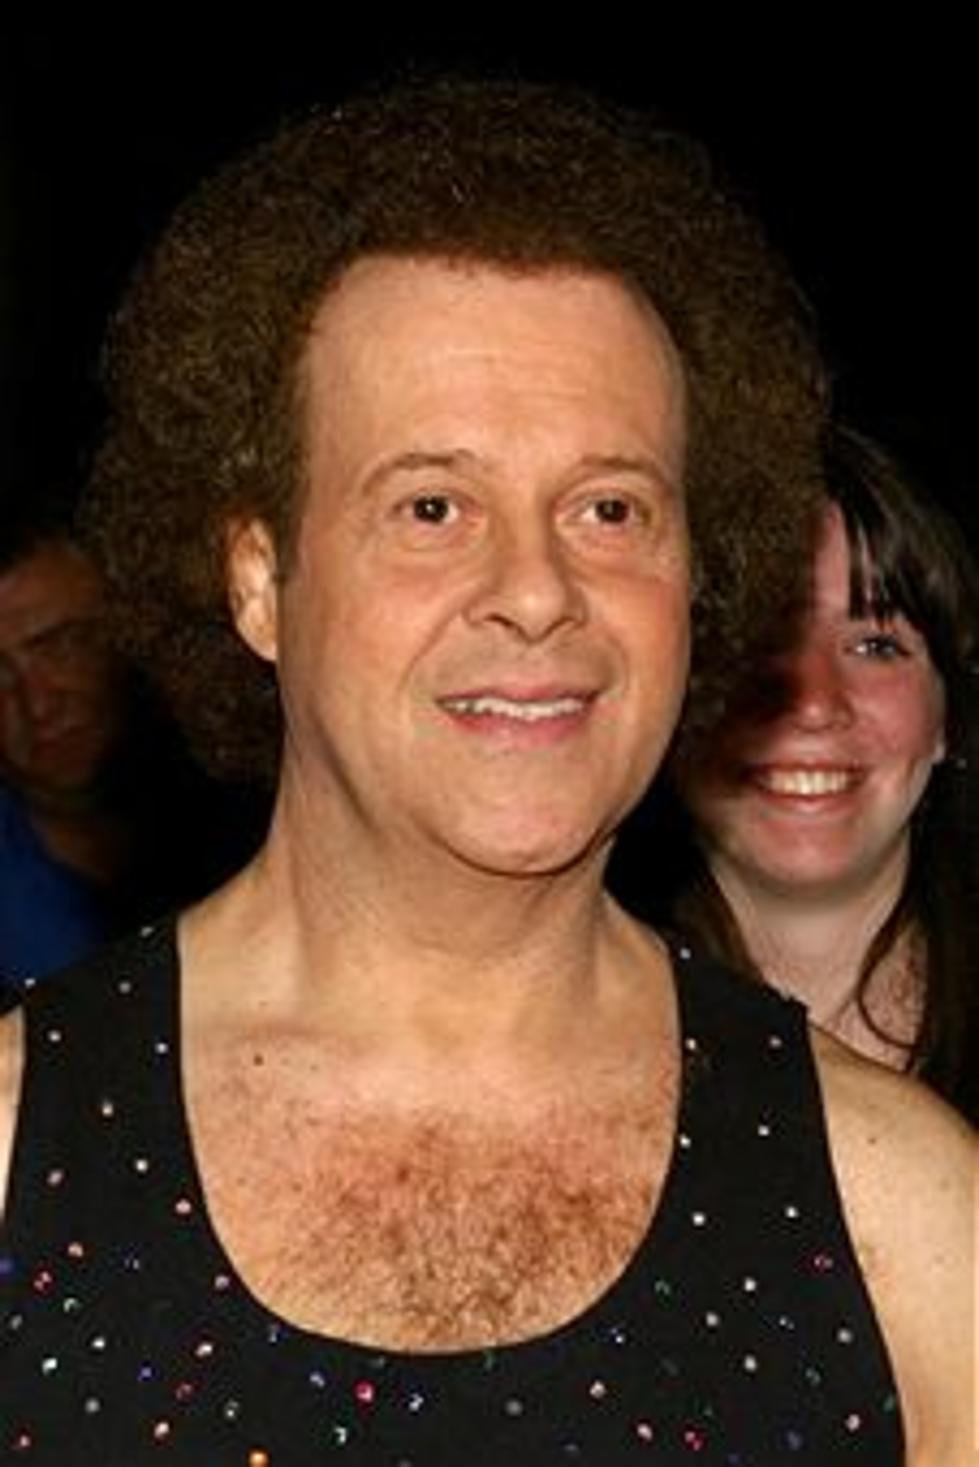 Funny Friday [VIDEO] – Richard Simmons Gets You Fit To Fly